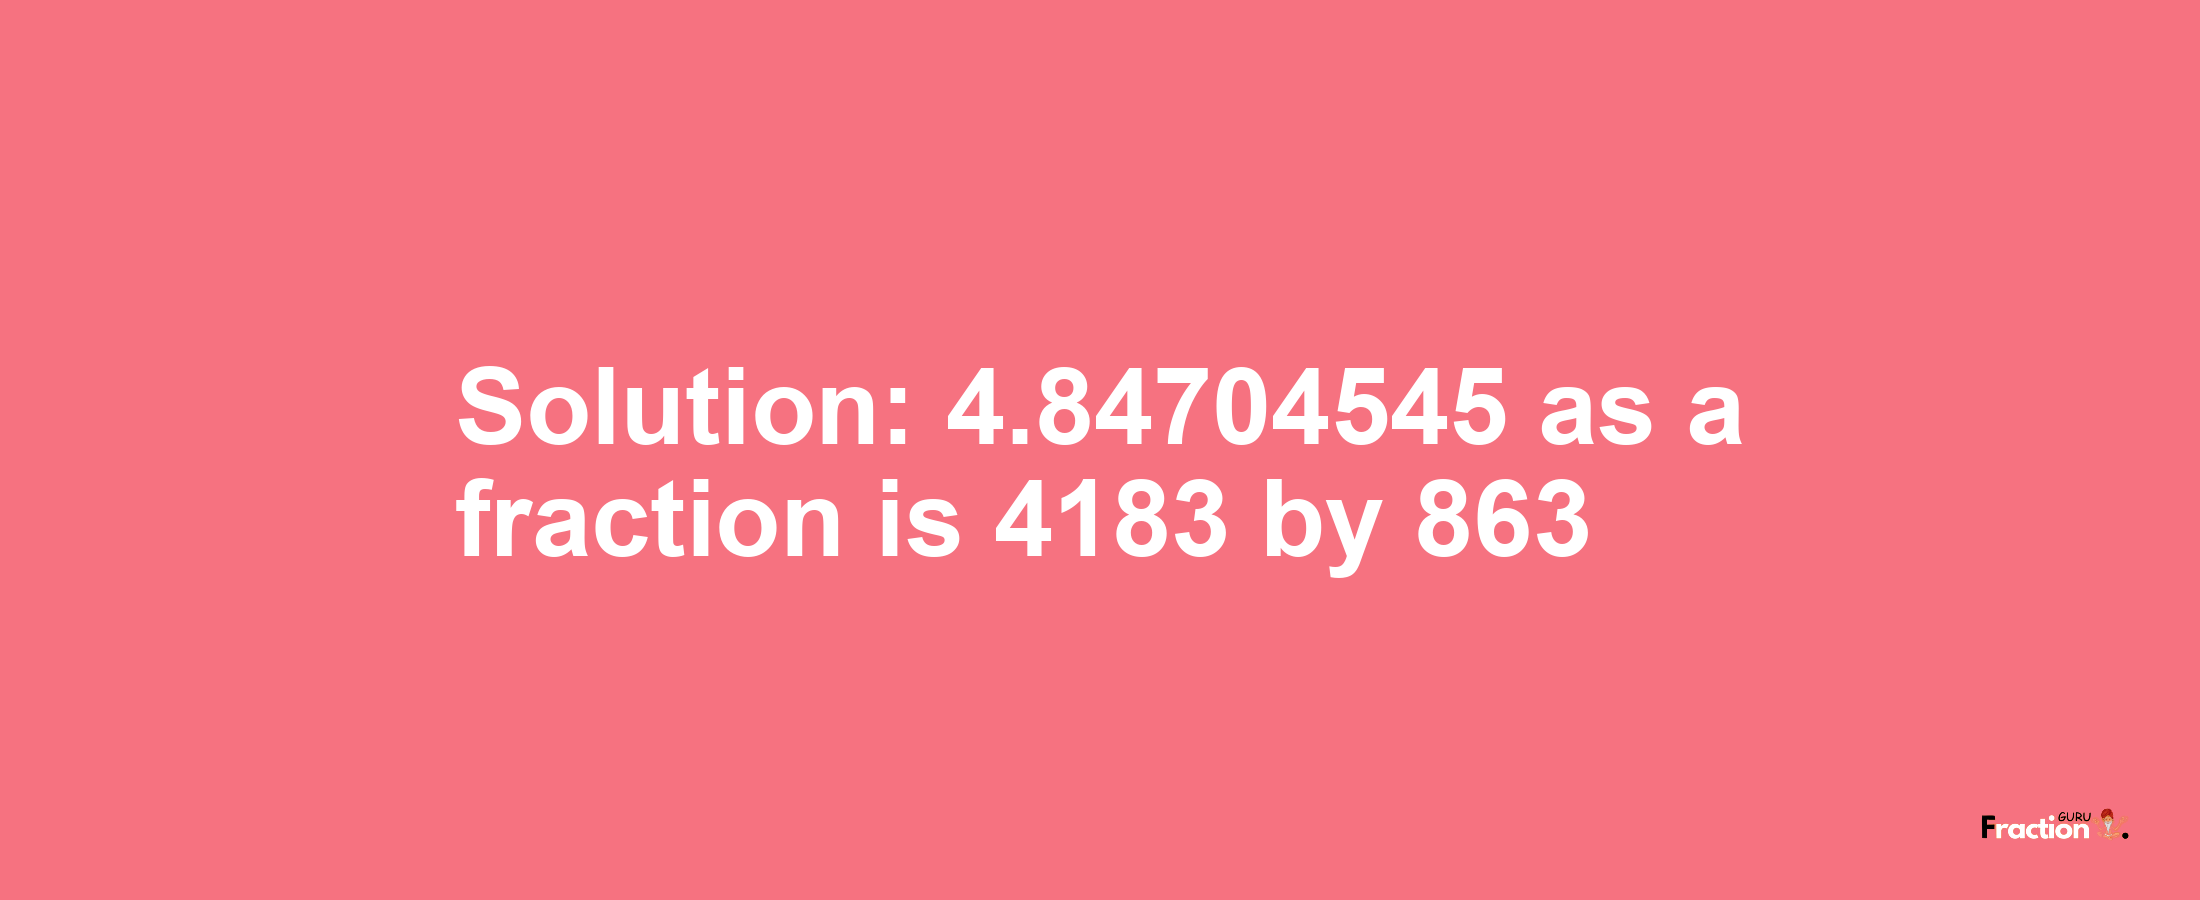 Solution:4.84704545 as a fraction is 4183/863